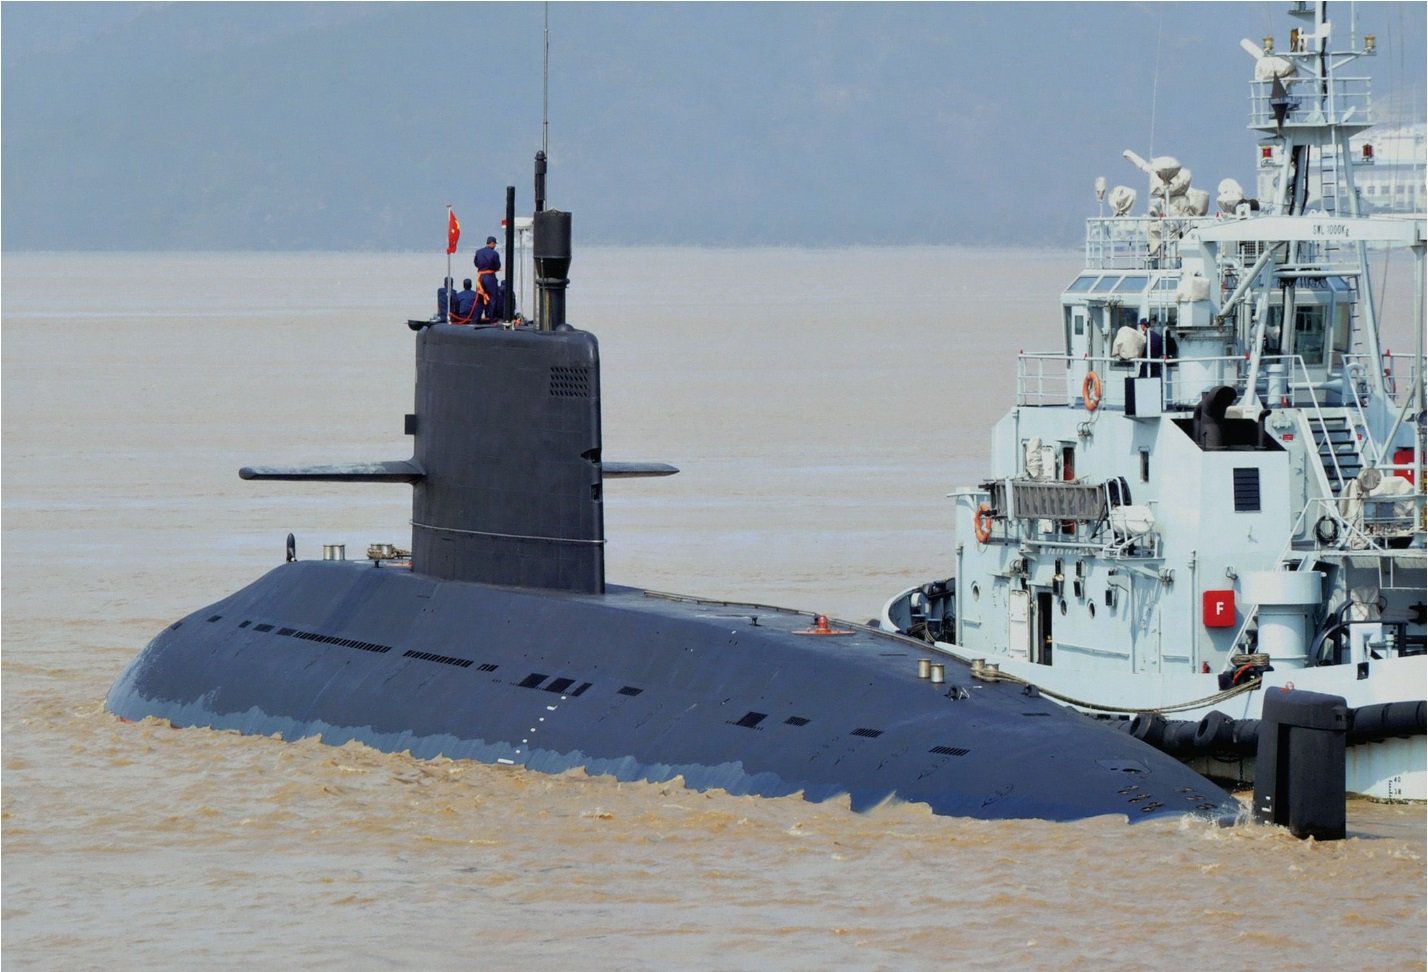 S26T is based on the PLAN Type 039A SSK